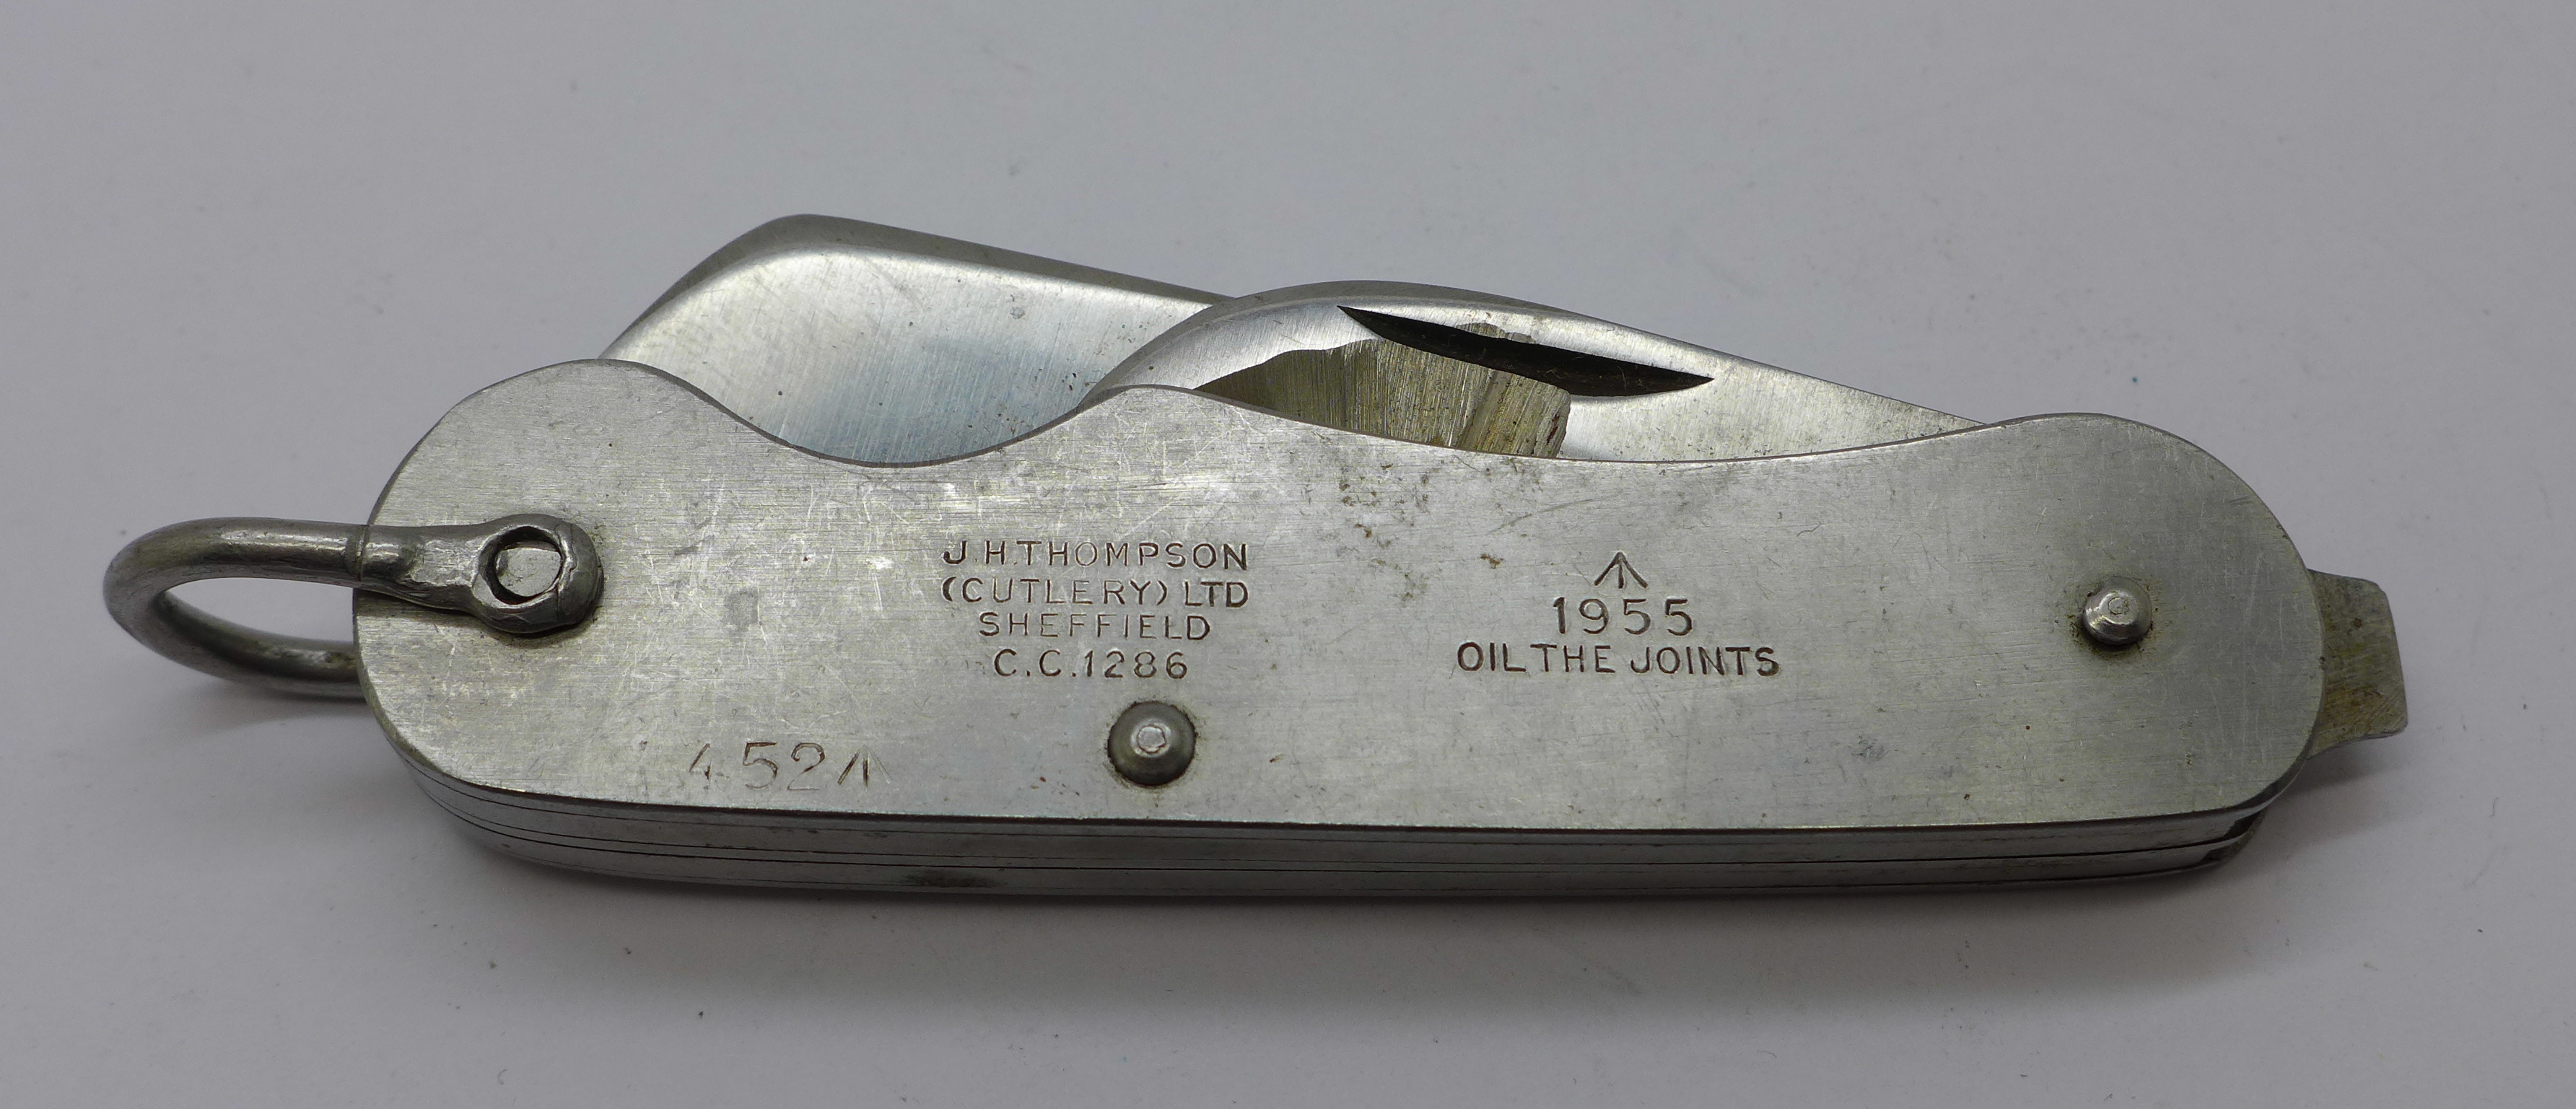 A military pocket knife, Thompson, Sheffield, marked 1955 and with broad arrow